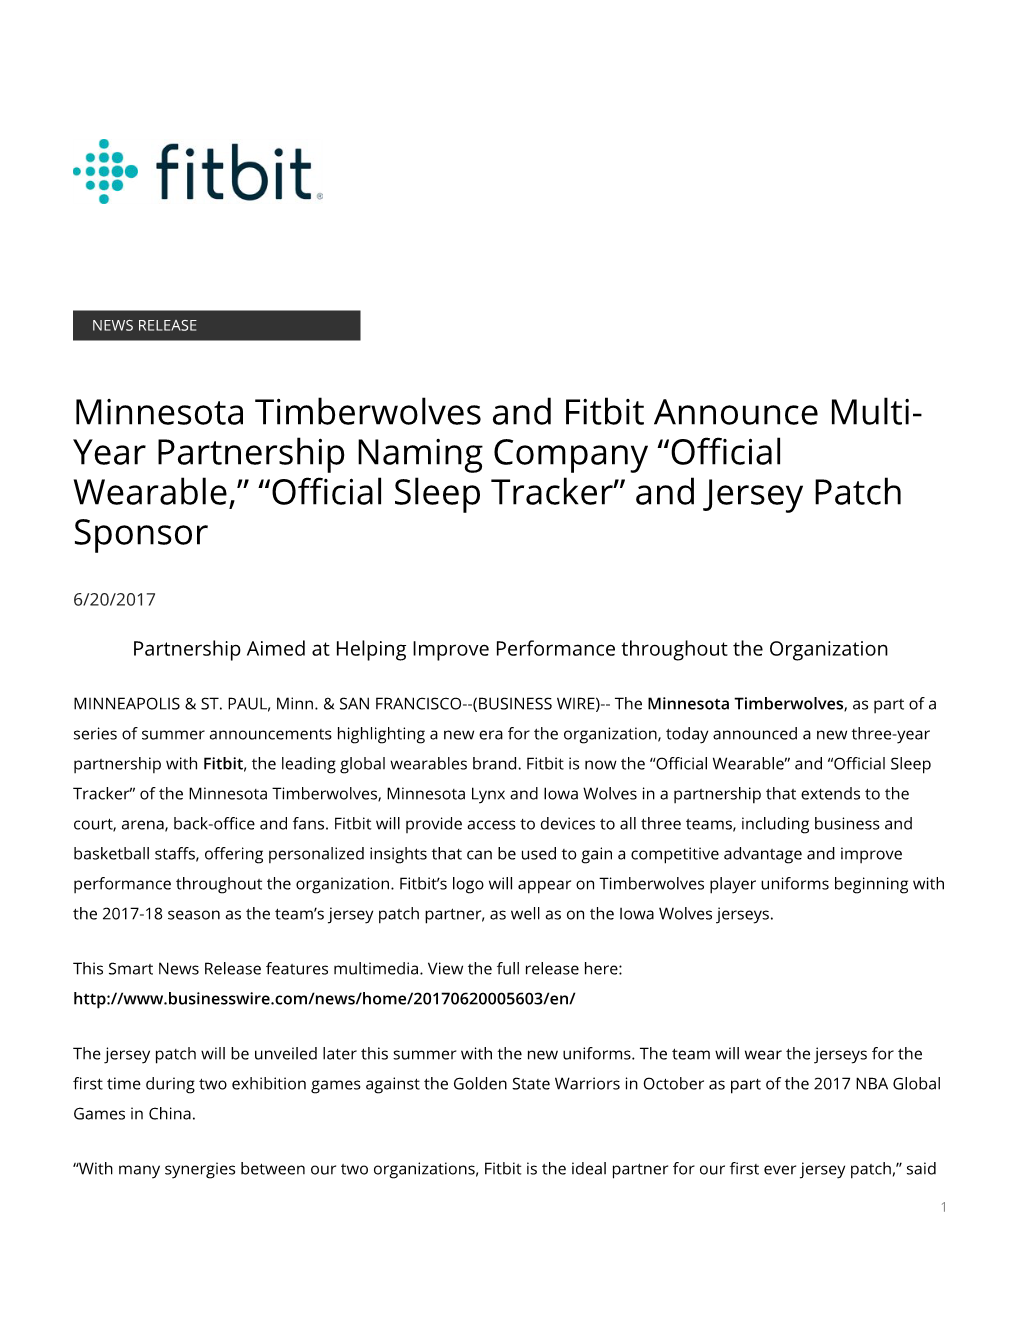 Minnesota Timberwolves and Fitbit Announce Multi- Year Partnership Naming Company “Official Wearable,” “Official Sleep Tracker” and Jersey Patch Sponsor